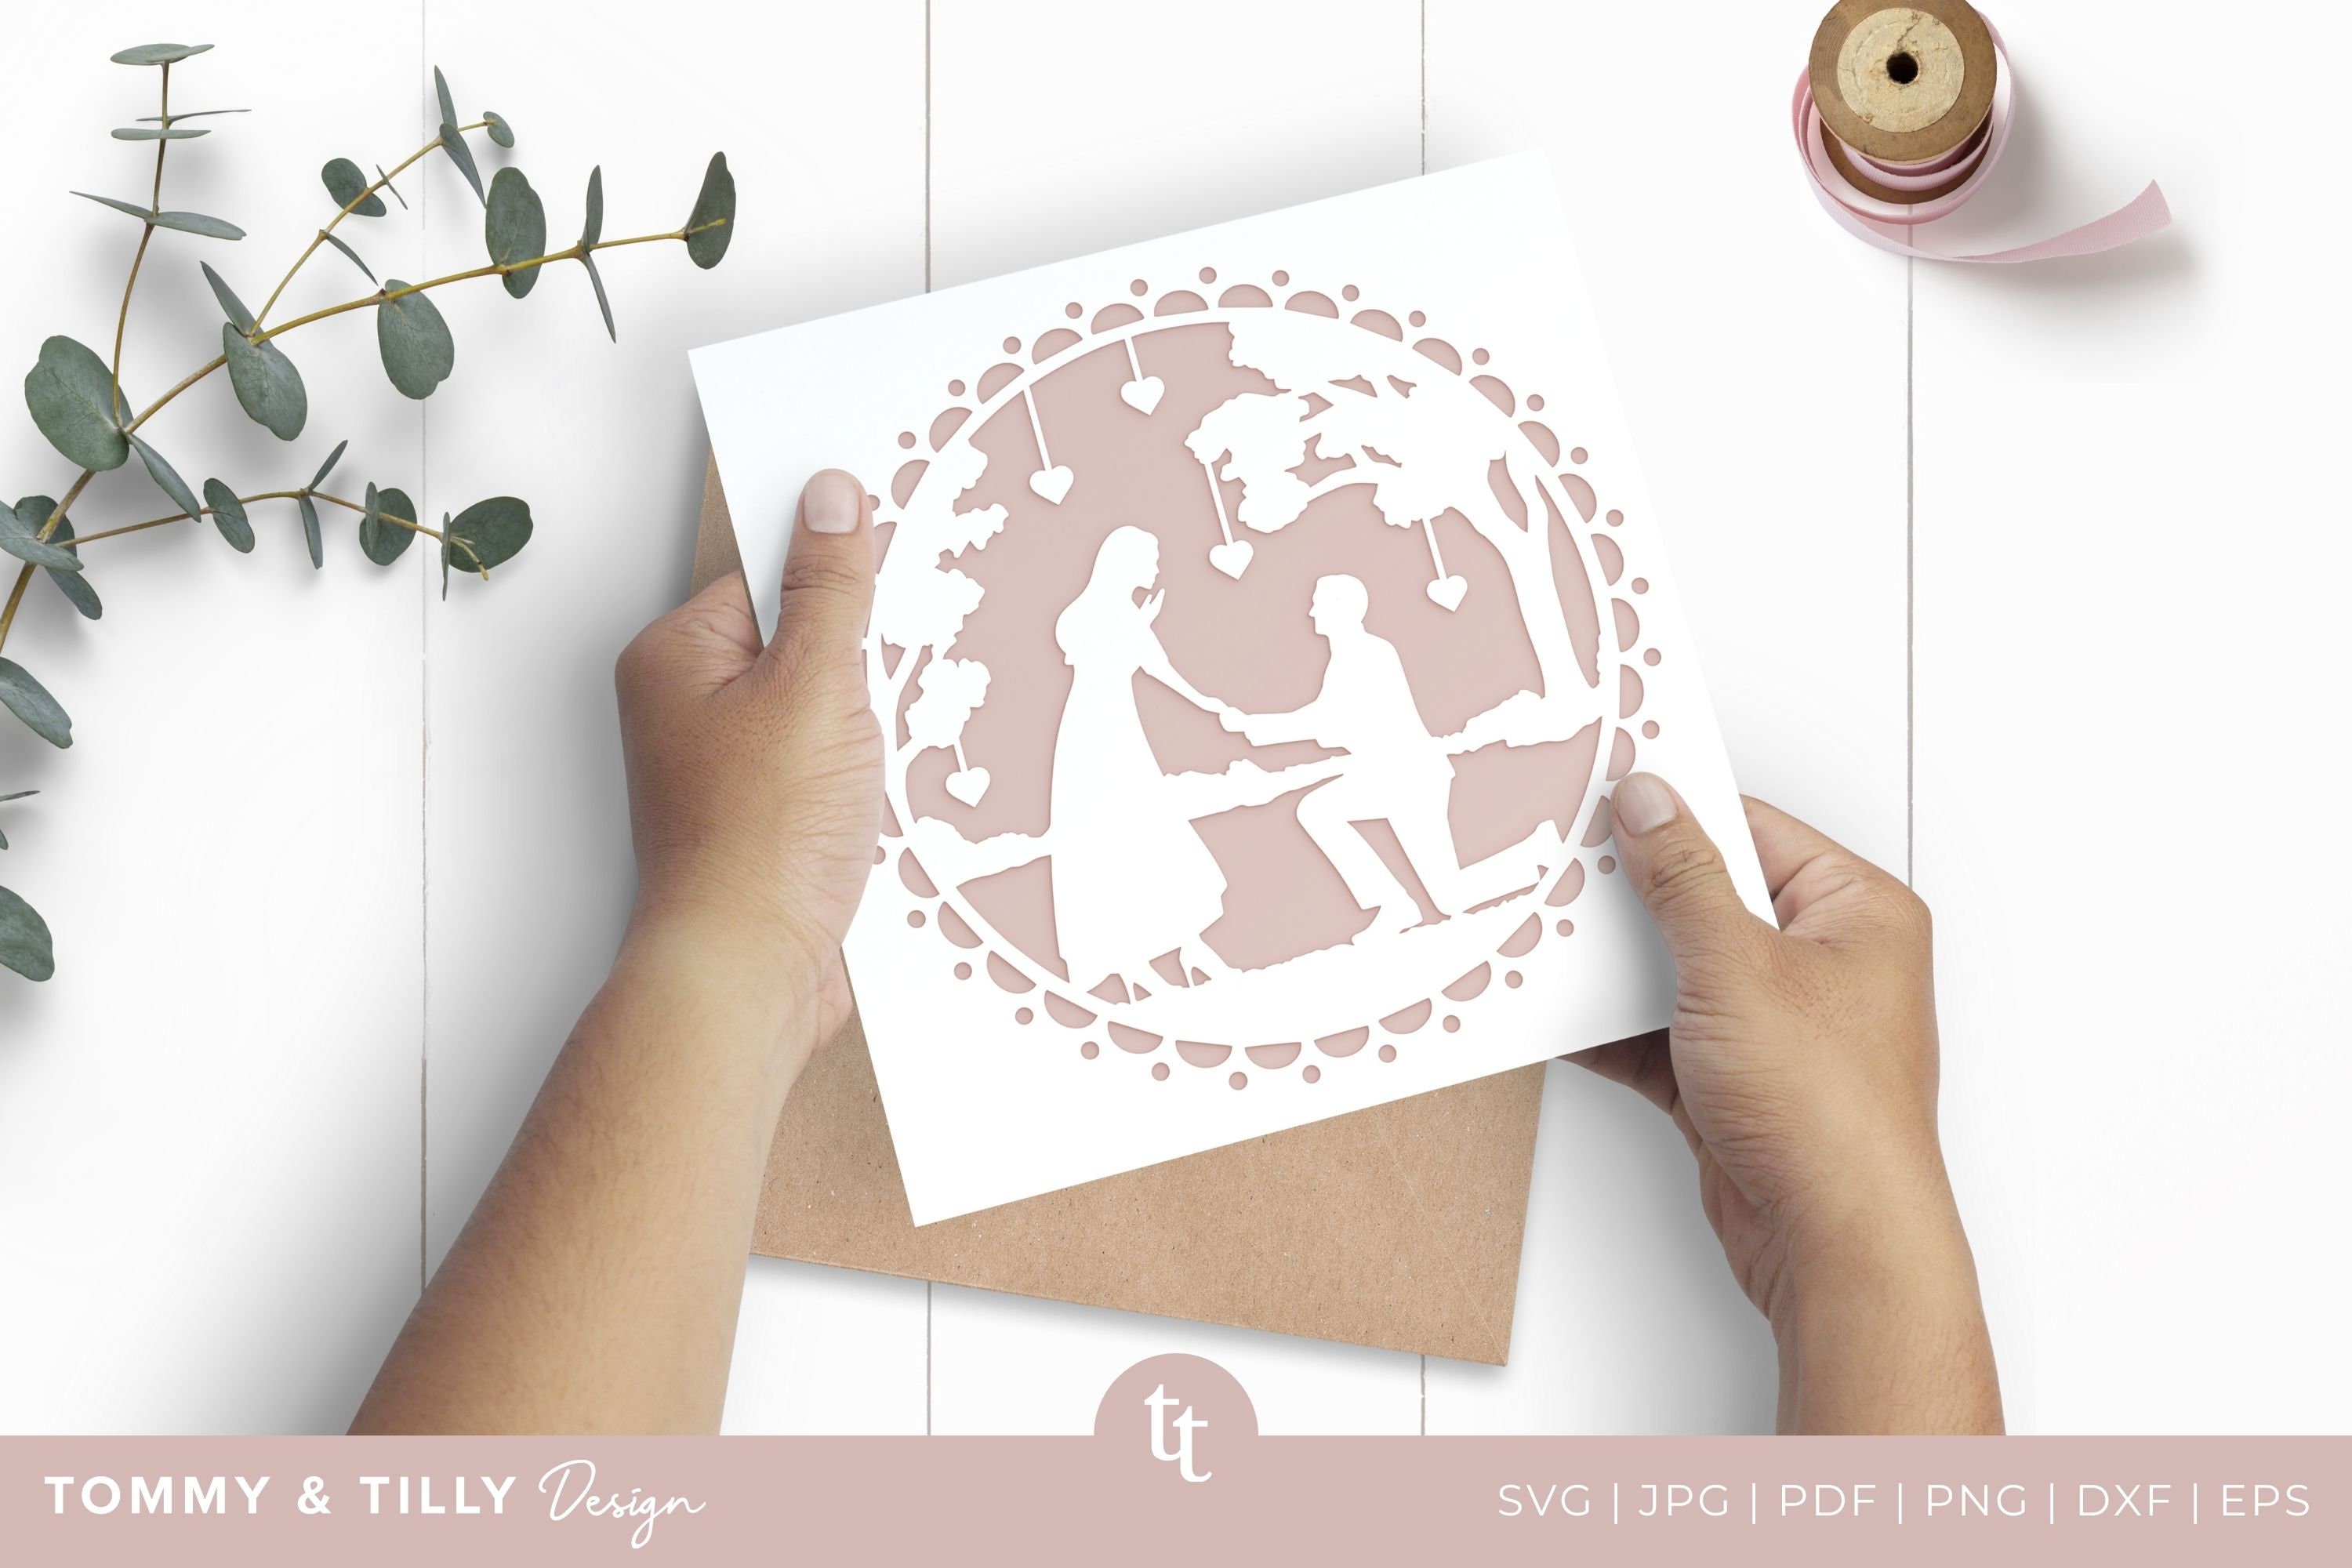 FREE Cricut Card - Perfect for Weddings & Engagements - Tommy & Tilly Design